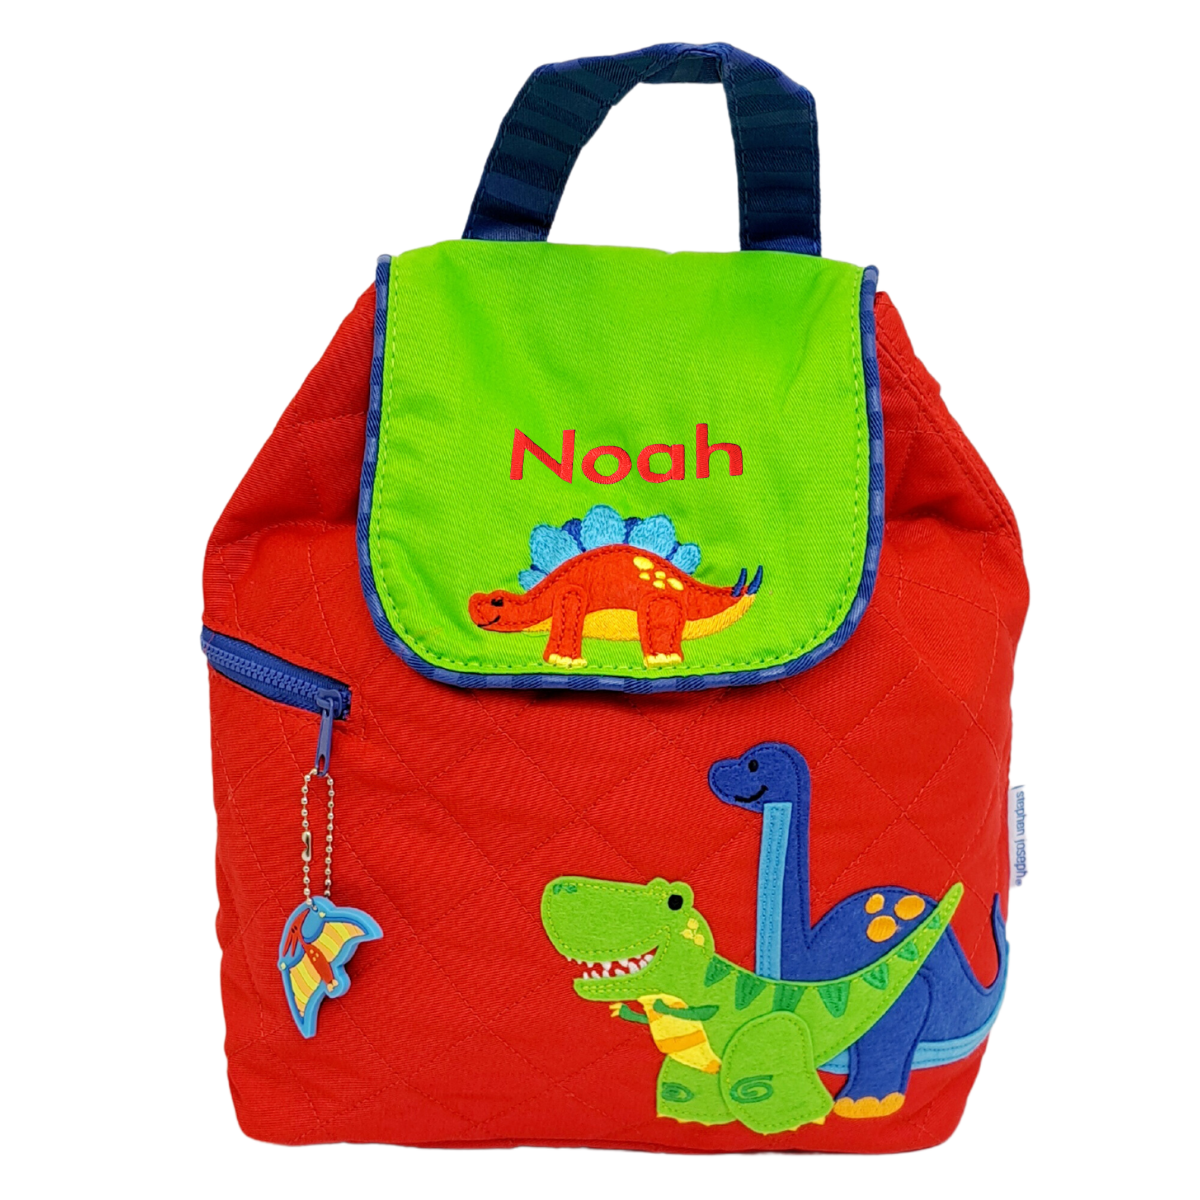 Image of a Stephen Joseph quilted back pack for children. The back pack has a red main body with two appliqued dinosaurs on it in bright colours. The flap of the bag is green with a red appliqued dinosaur on it and the flap can be personalised with a name of up to 10 characters.